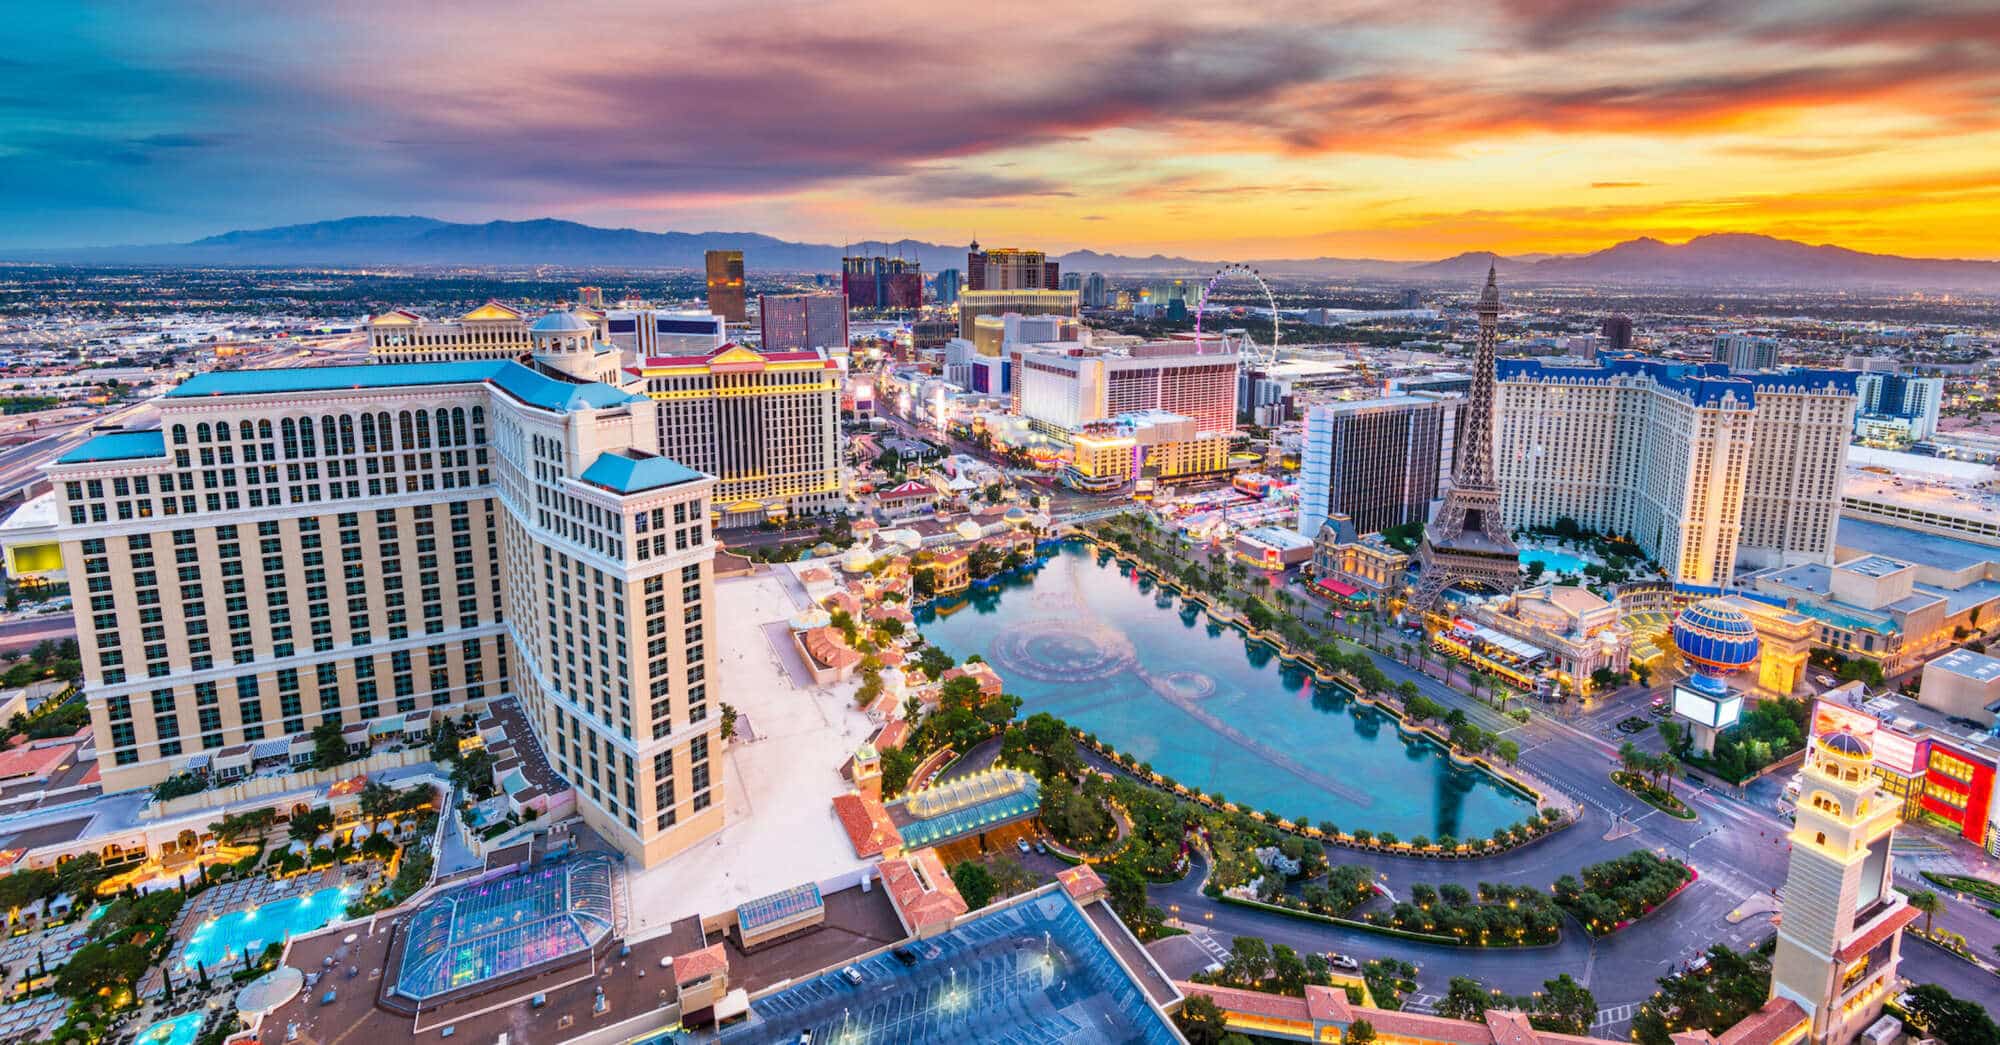 Las Vegas Photo Spots: 9 Places You Can't Miss - On The Road With Jen